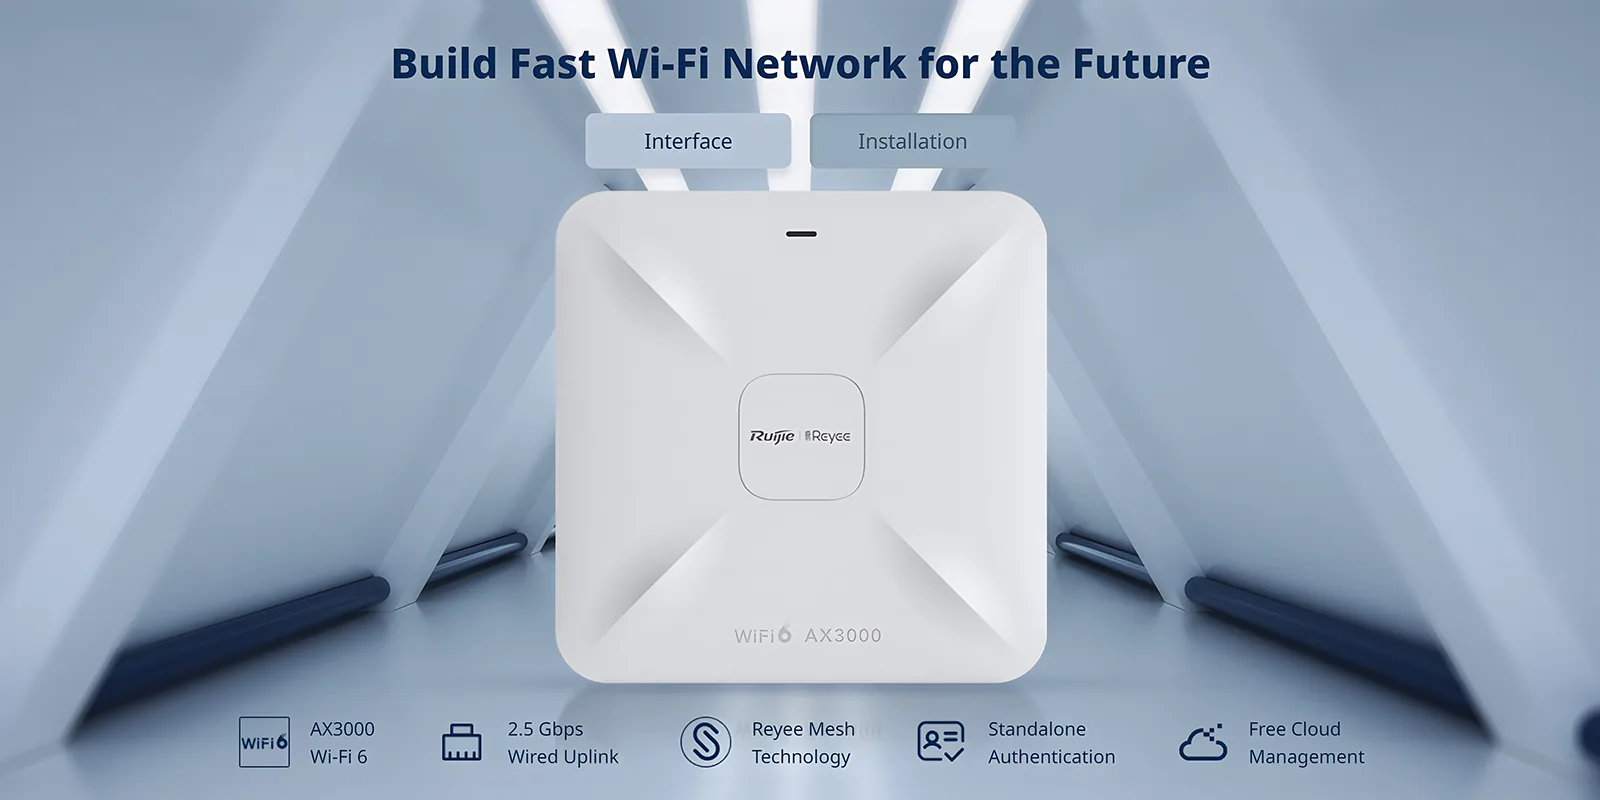 A WiFi 6 access point infographic showing the features, including 2.5 Gbps uplink and free cloud management.